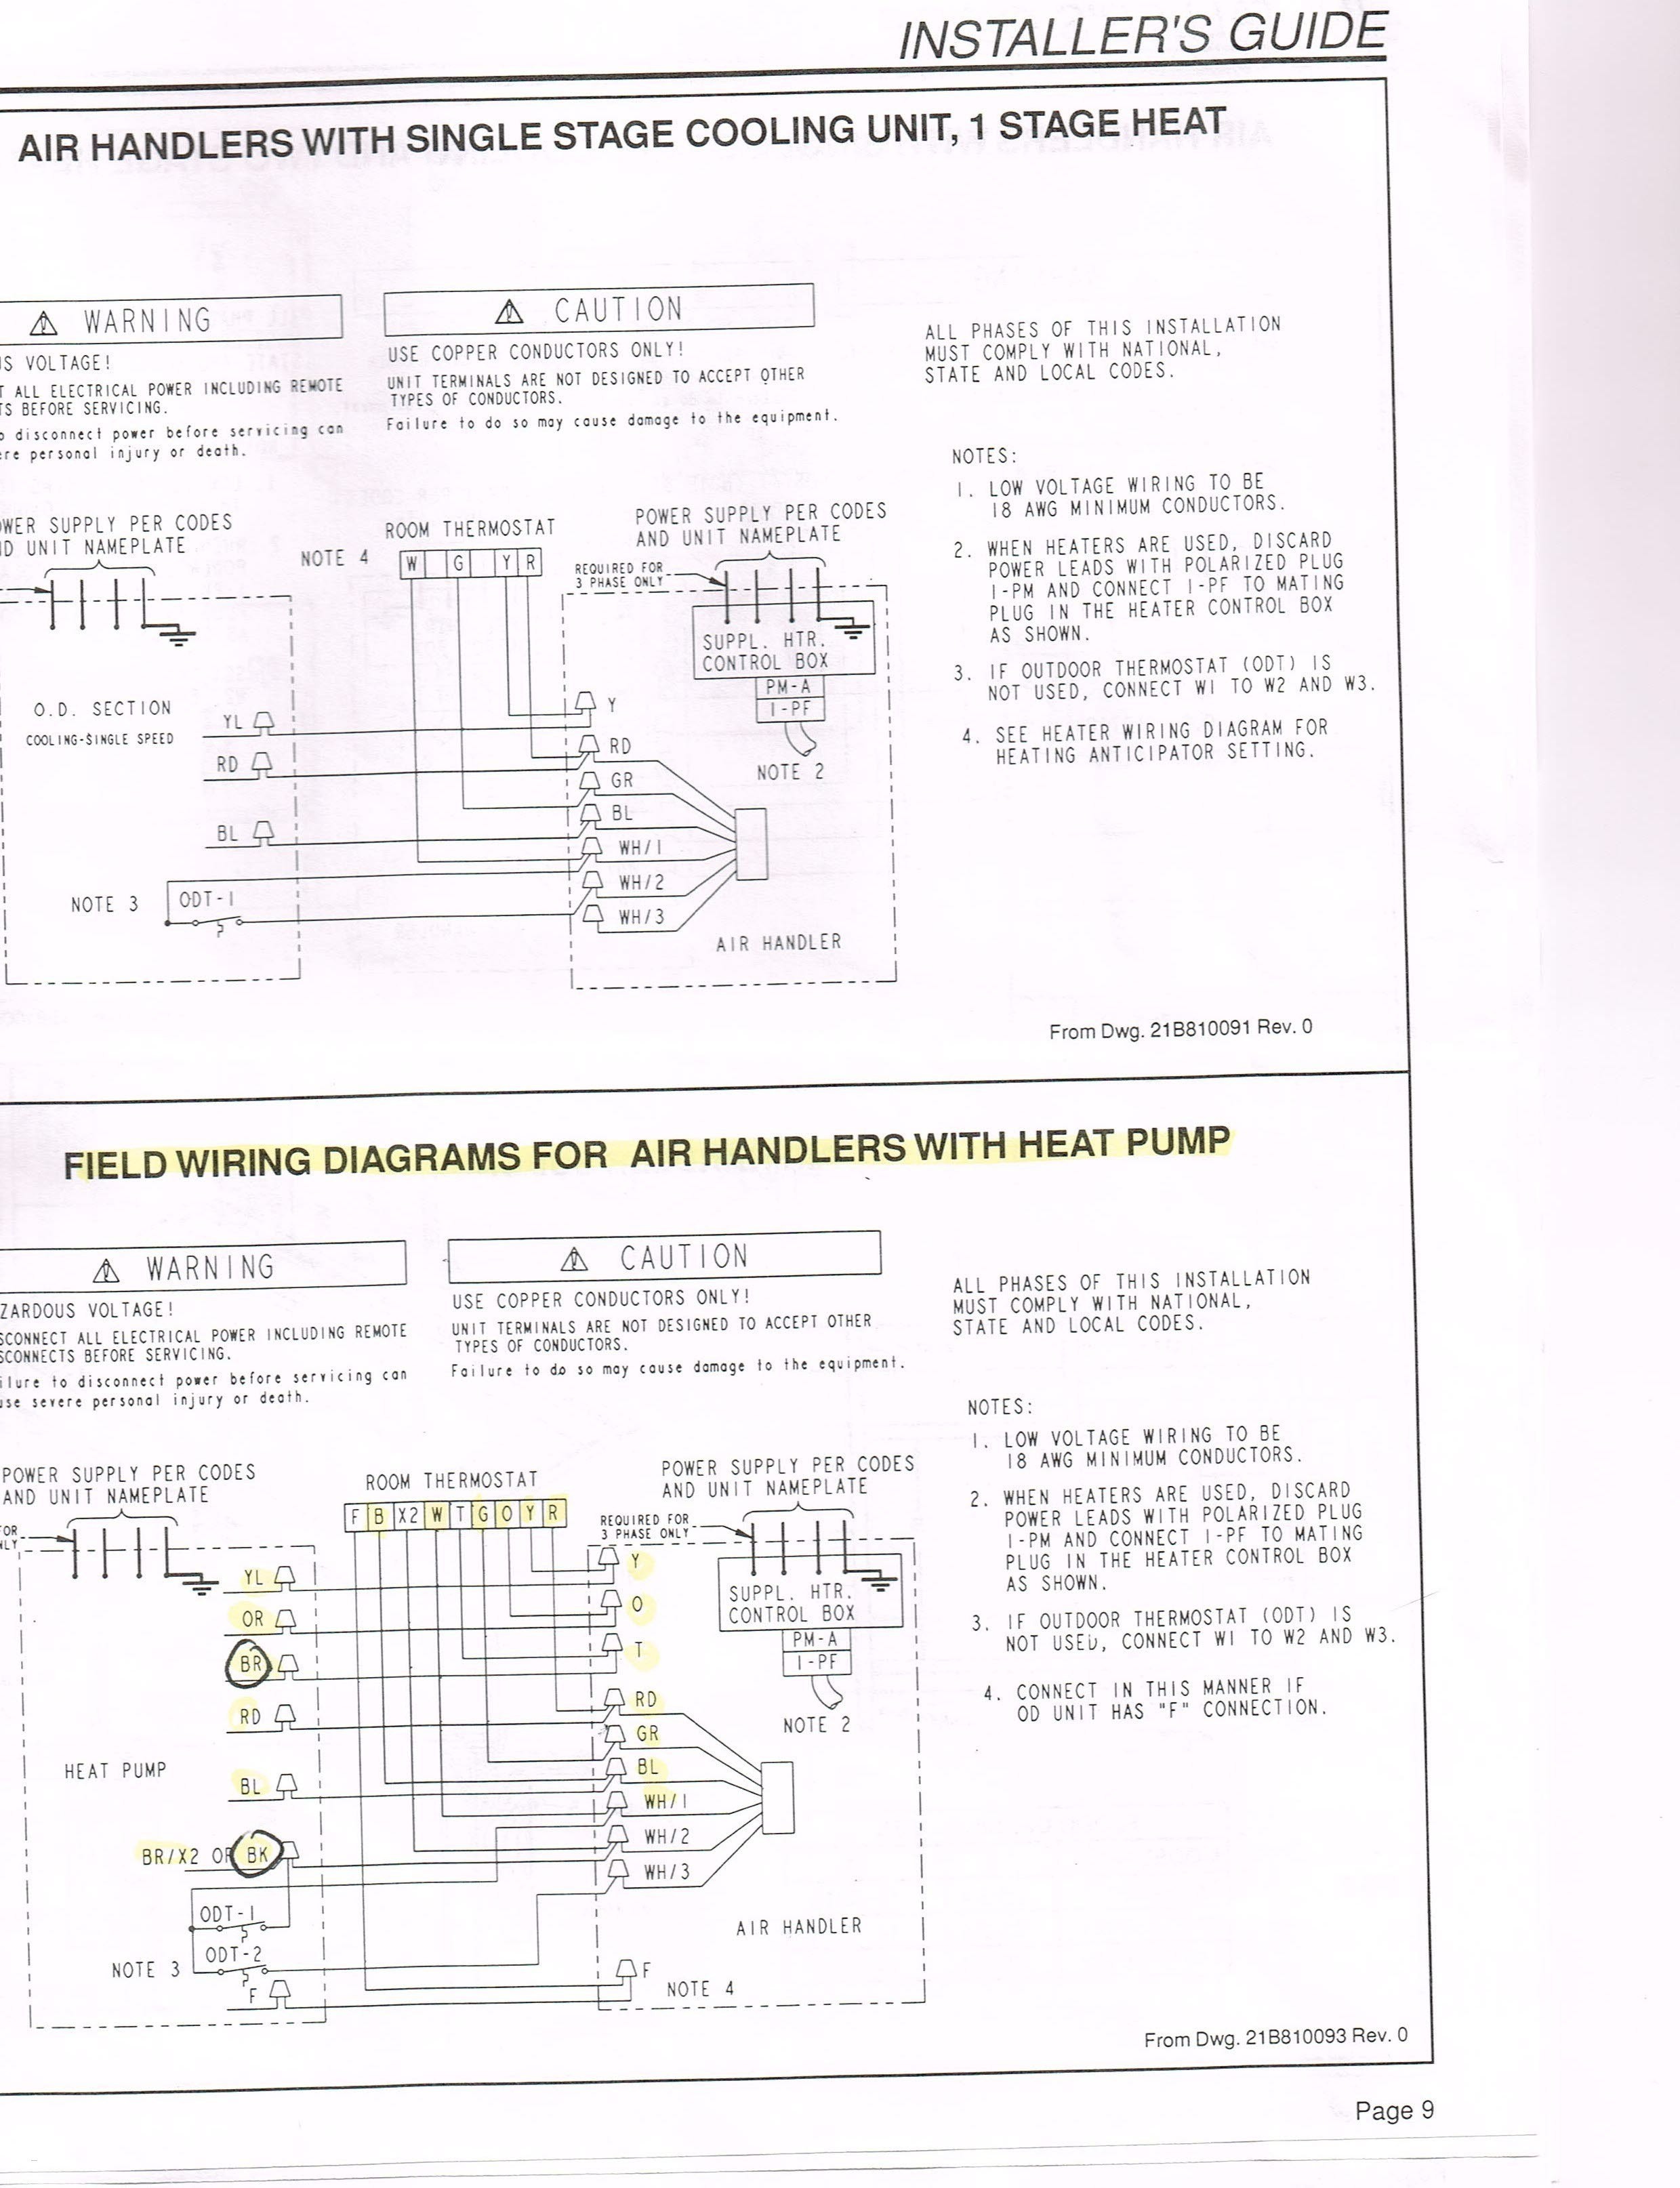 Wiring Diagrams for Central Heating New Wiring Diagram for Heating System New Electrical Circuit Diagram